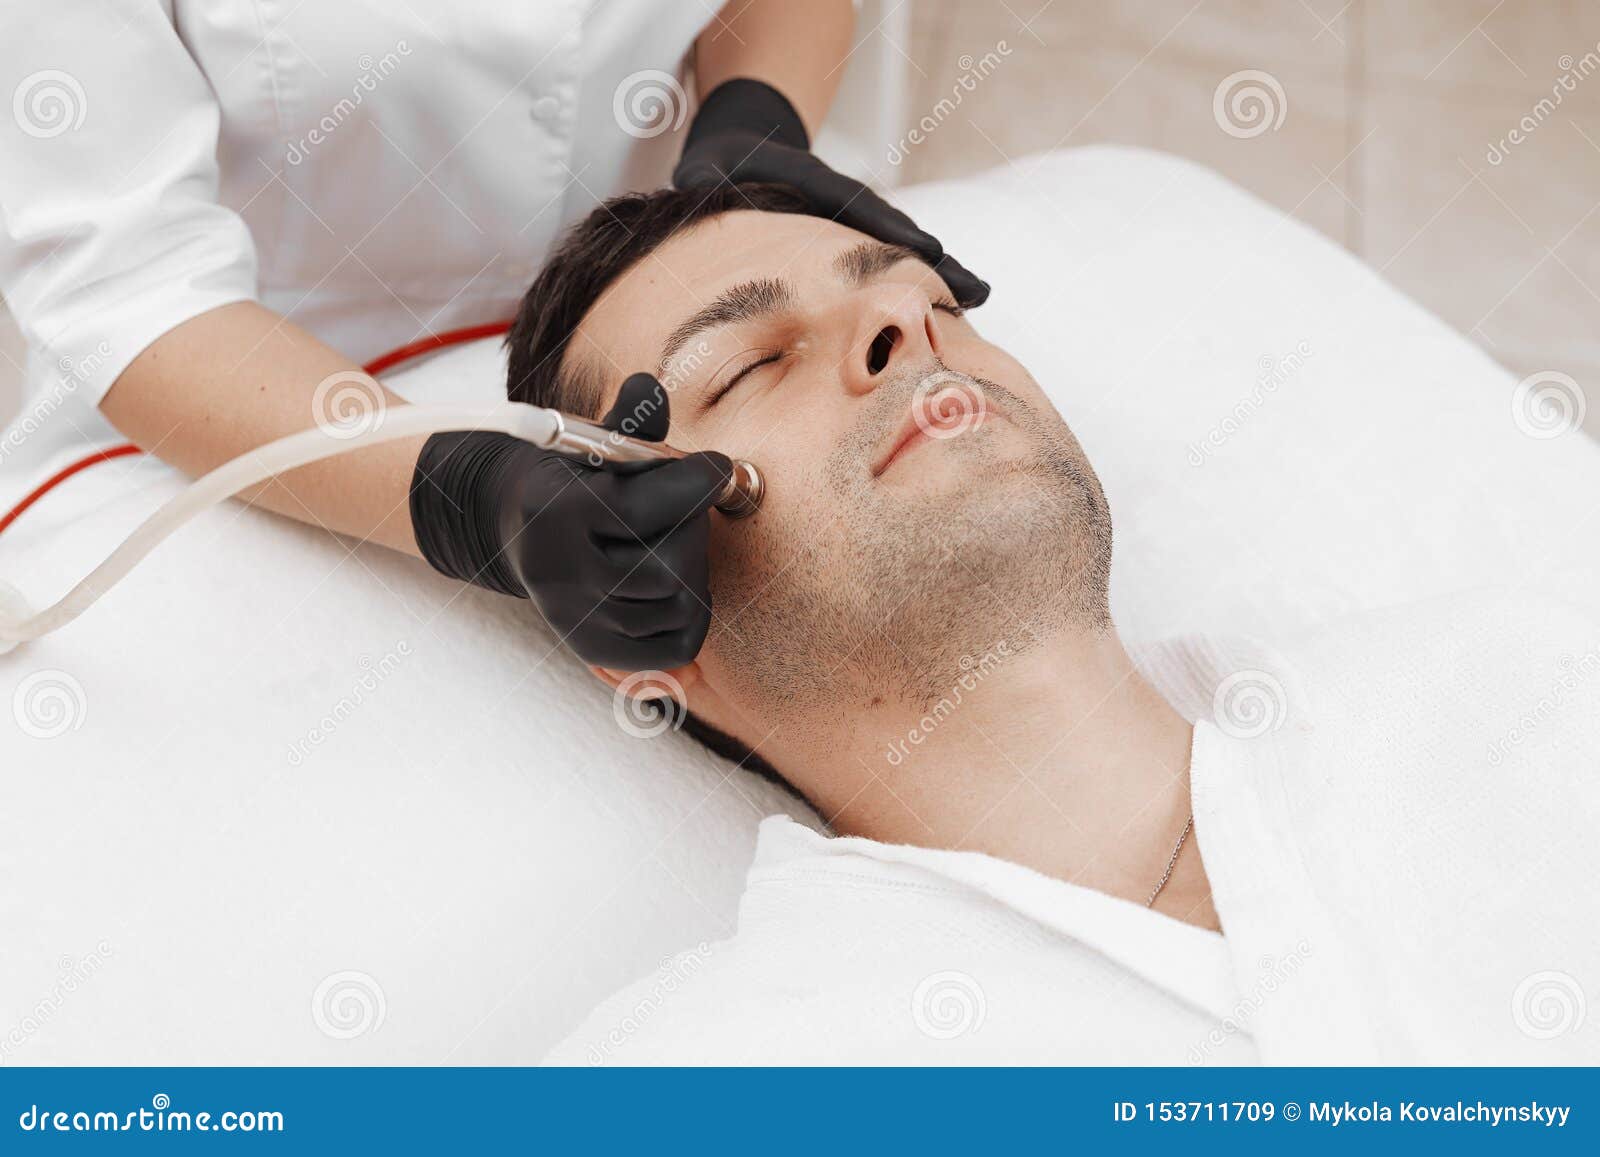 the cosmetologist makes the procedure microdermabrasion